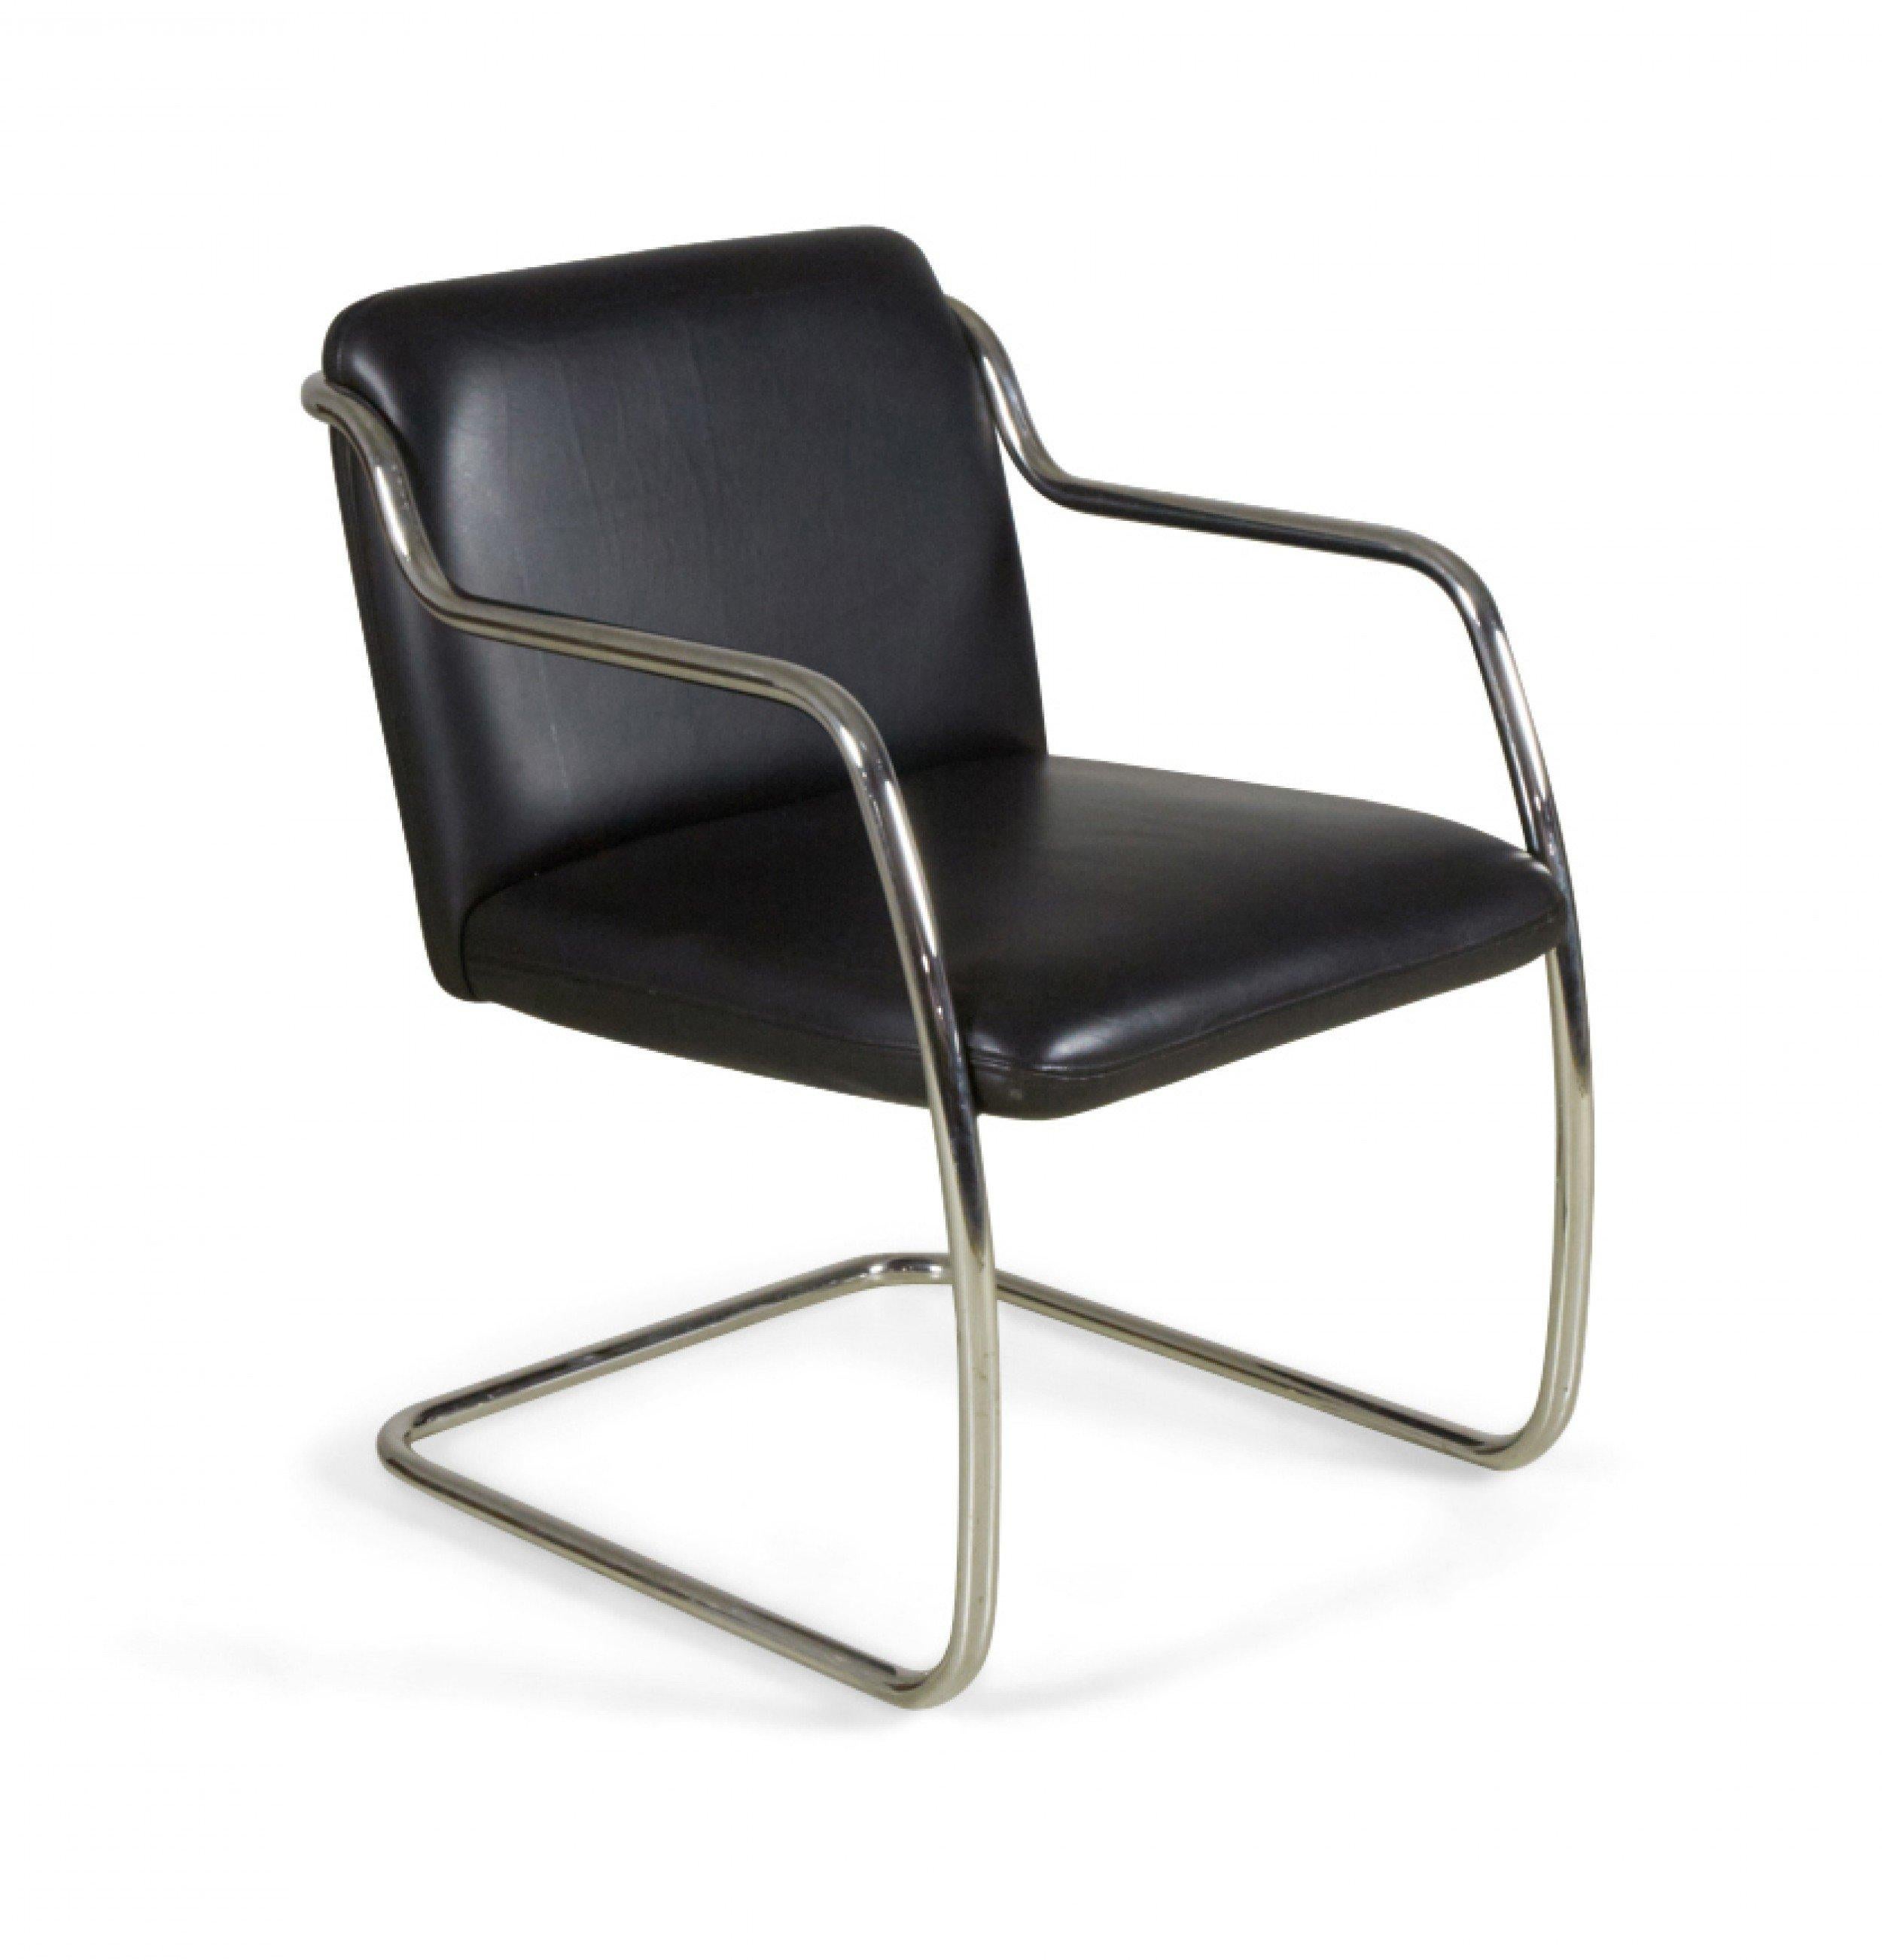 Pair of Contemporary armchairs with silver steel tube frames and black leather upholstery (BRUETON INDUSTRIES)(PRICED AS PAIR).